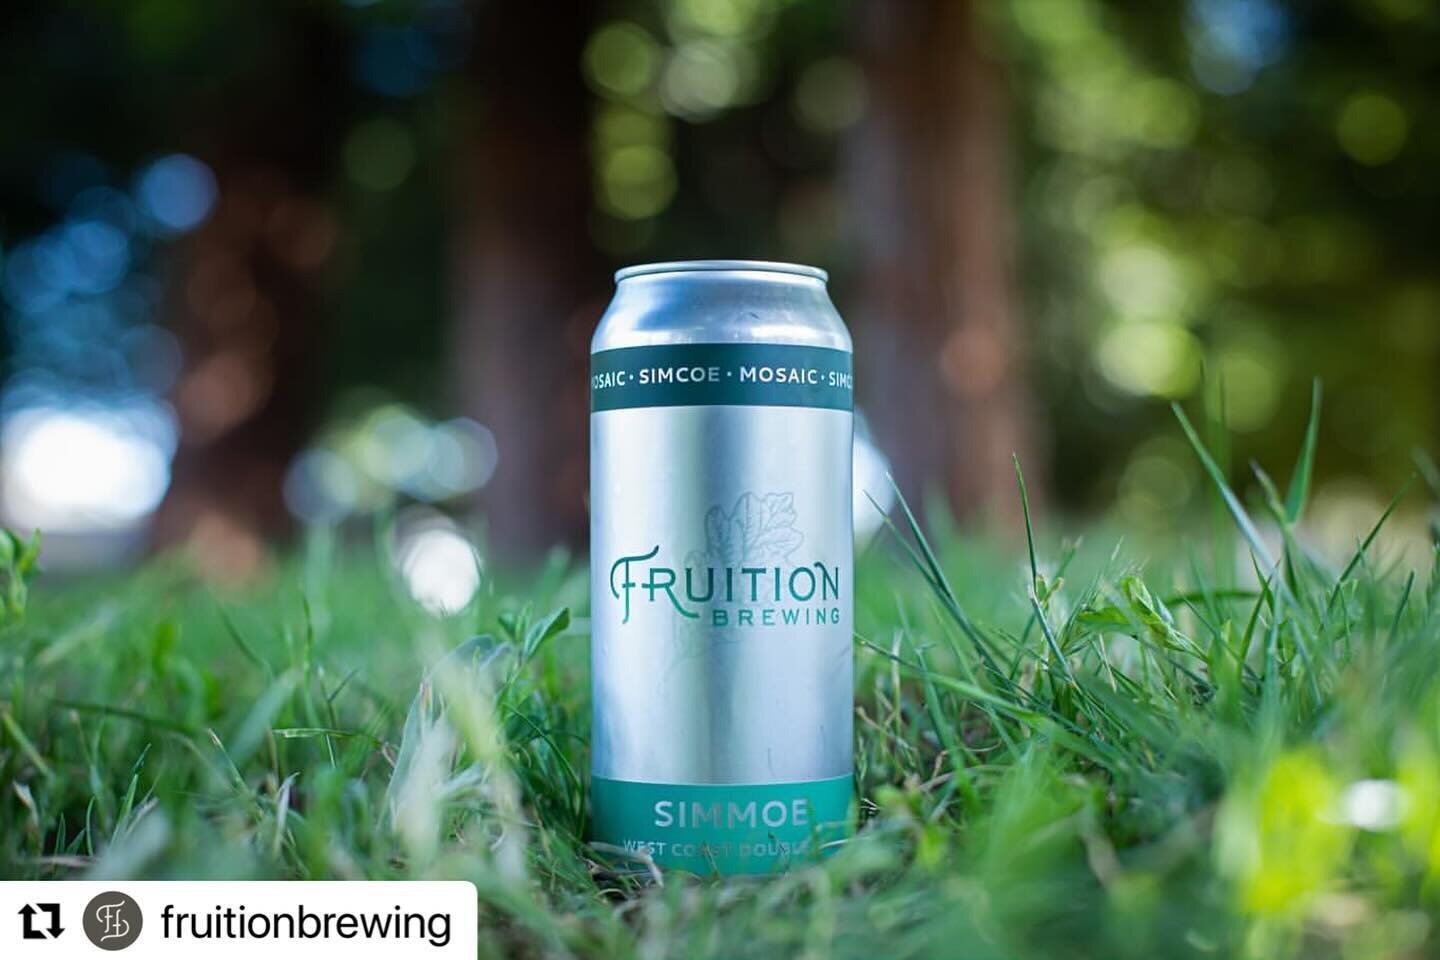 #Repost @fruitionbrewing
・・・
SIMCOE x MOSAIC
 = ✨SIMMOE✨ IS BACK!
Feeling like a fresh west coast double IPA kinda Friday.
☔️
Cozy up inside with us. The heaters on, &amp; we&rsquo;ve got hot &lsquo;n melty grilled cheeses to pair with our hearty and